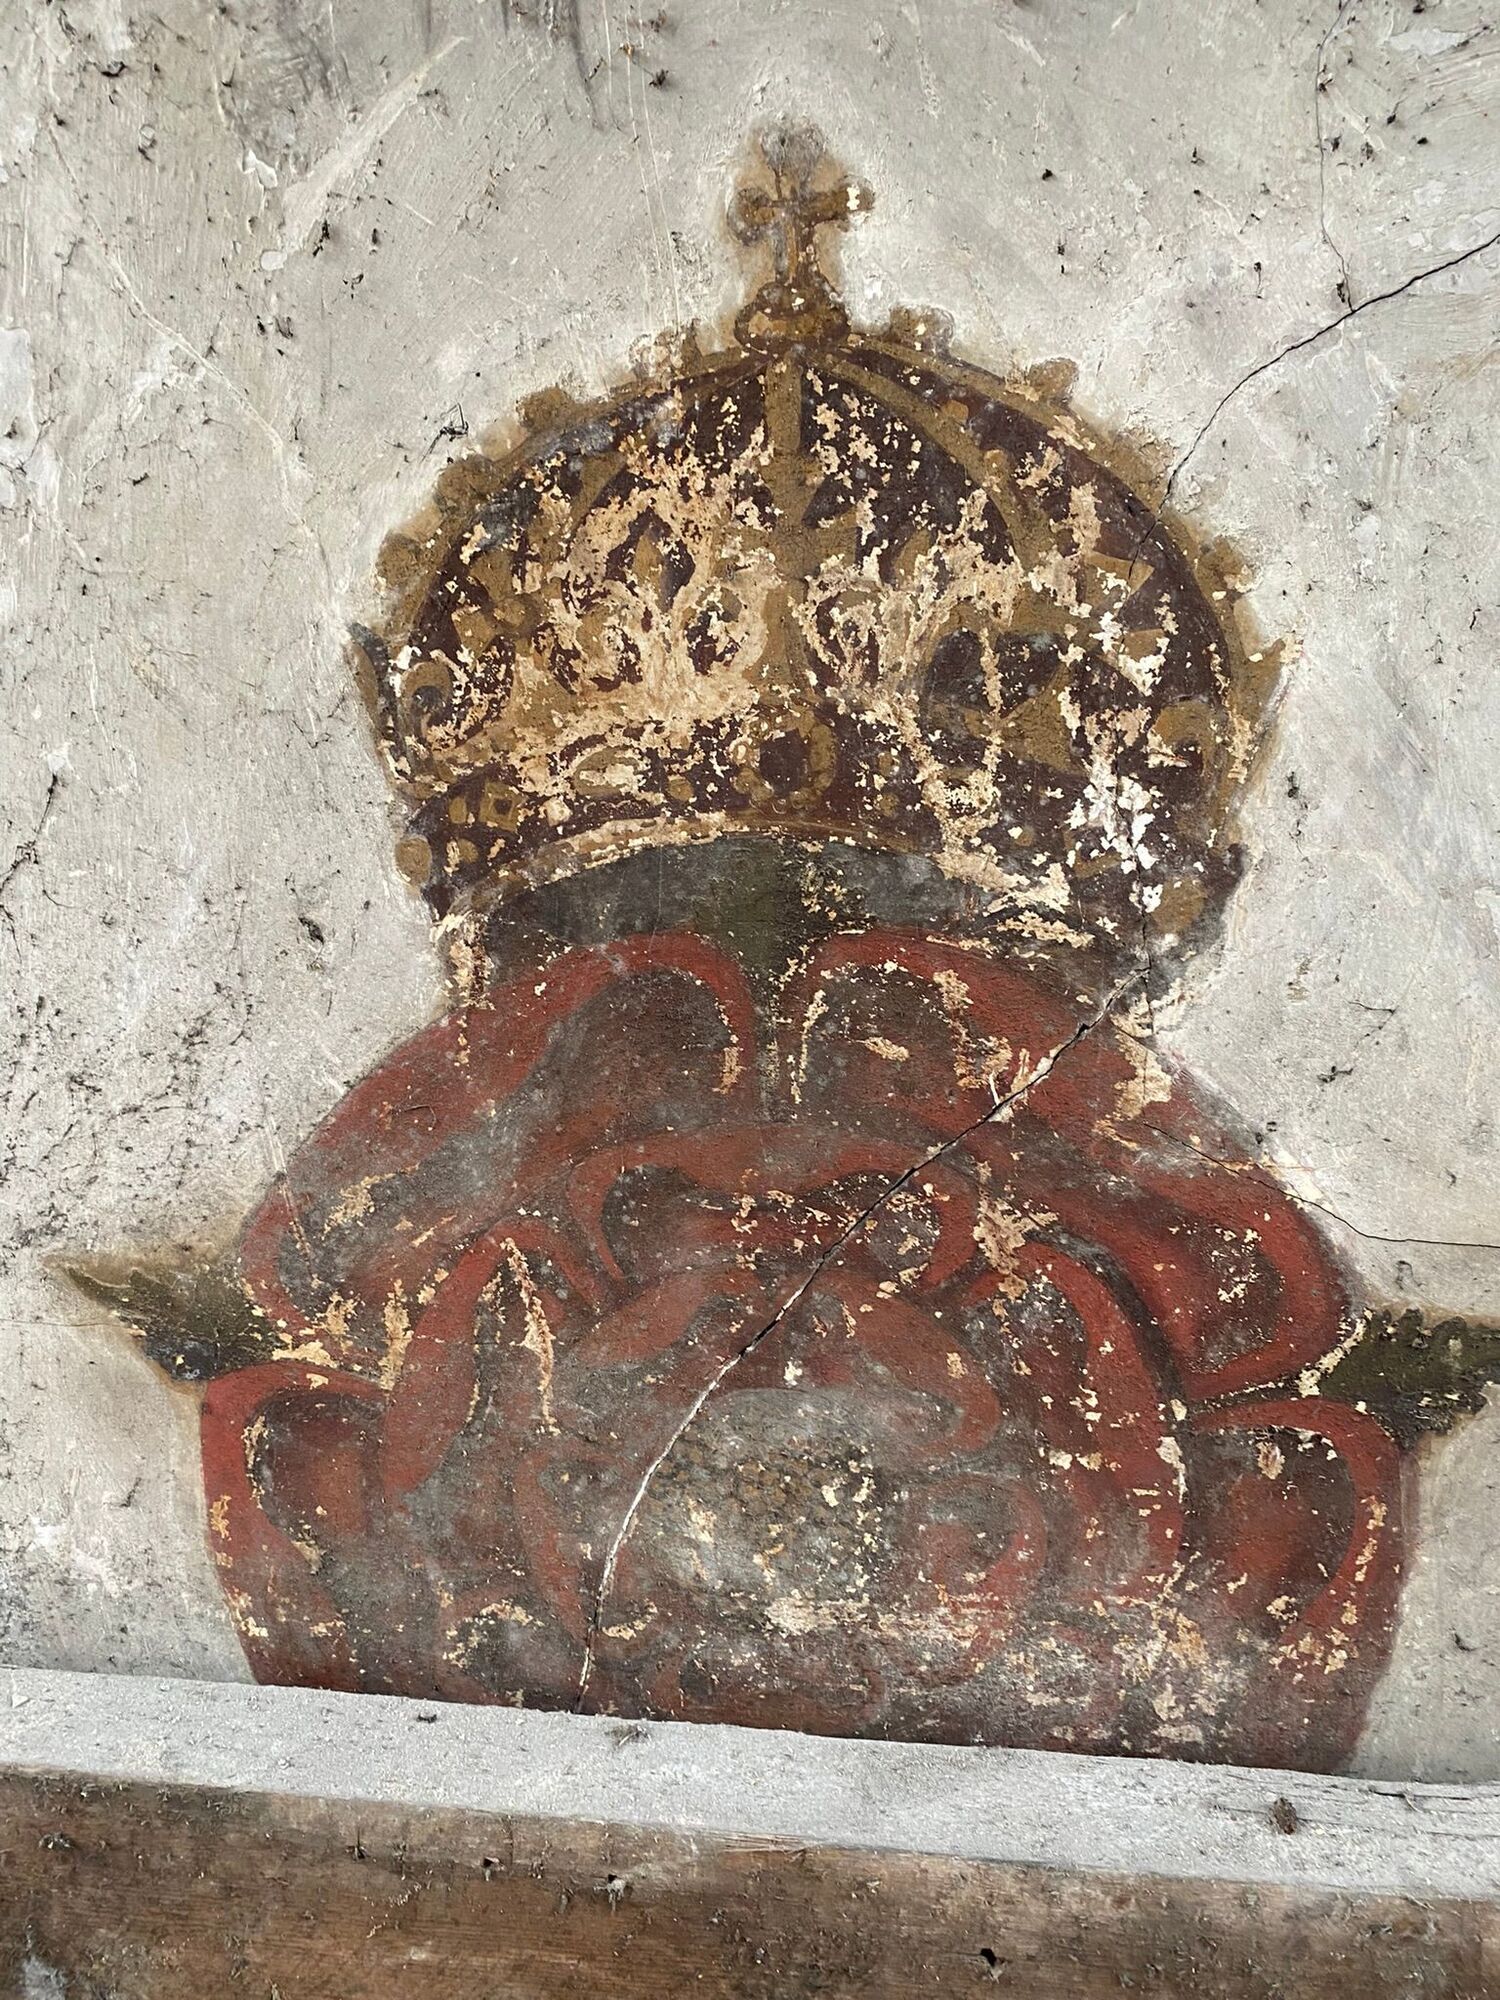 In Cambridge University, builders accidentally discovered medieval wall paintings (photo)